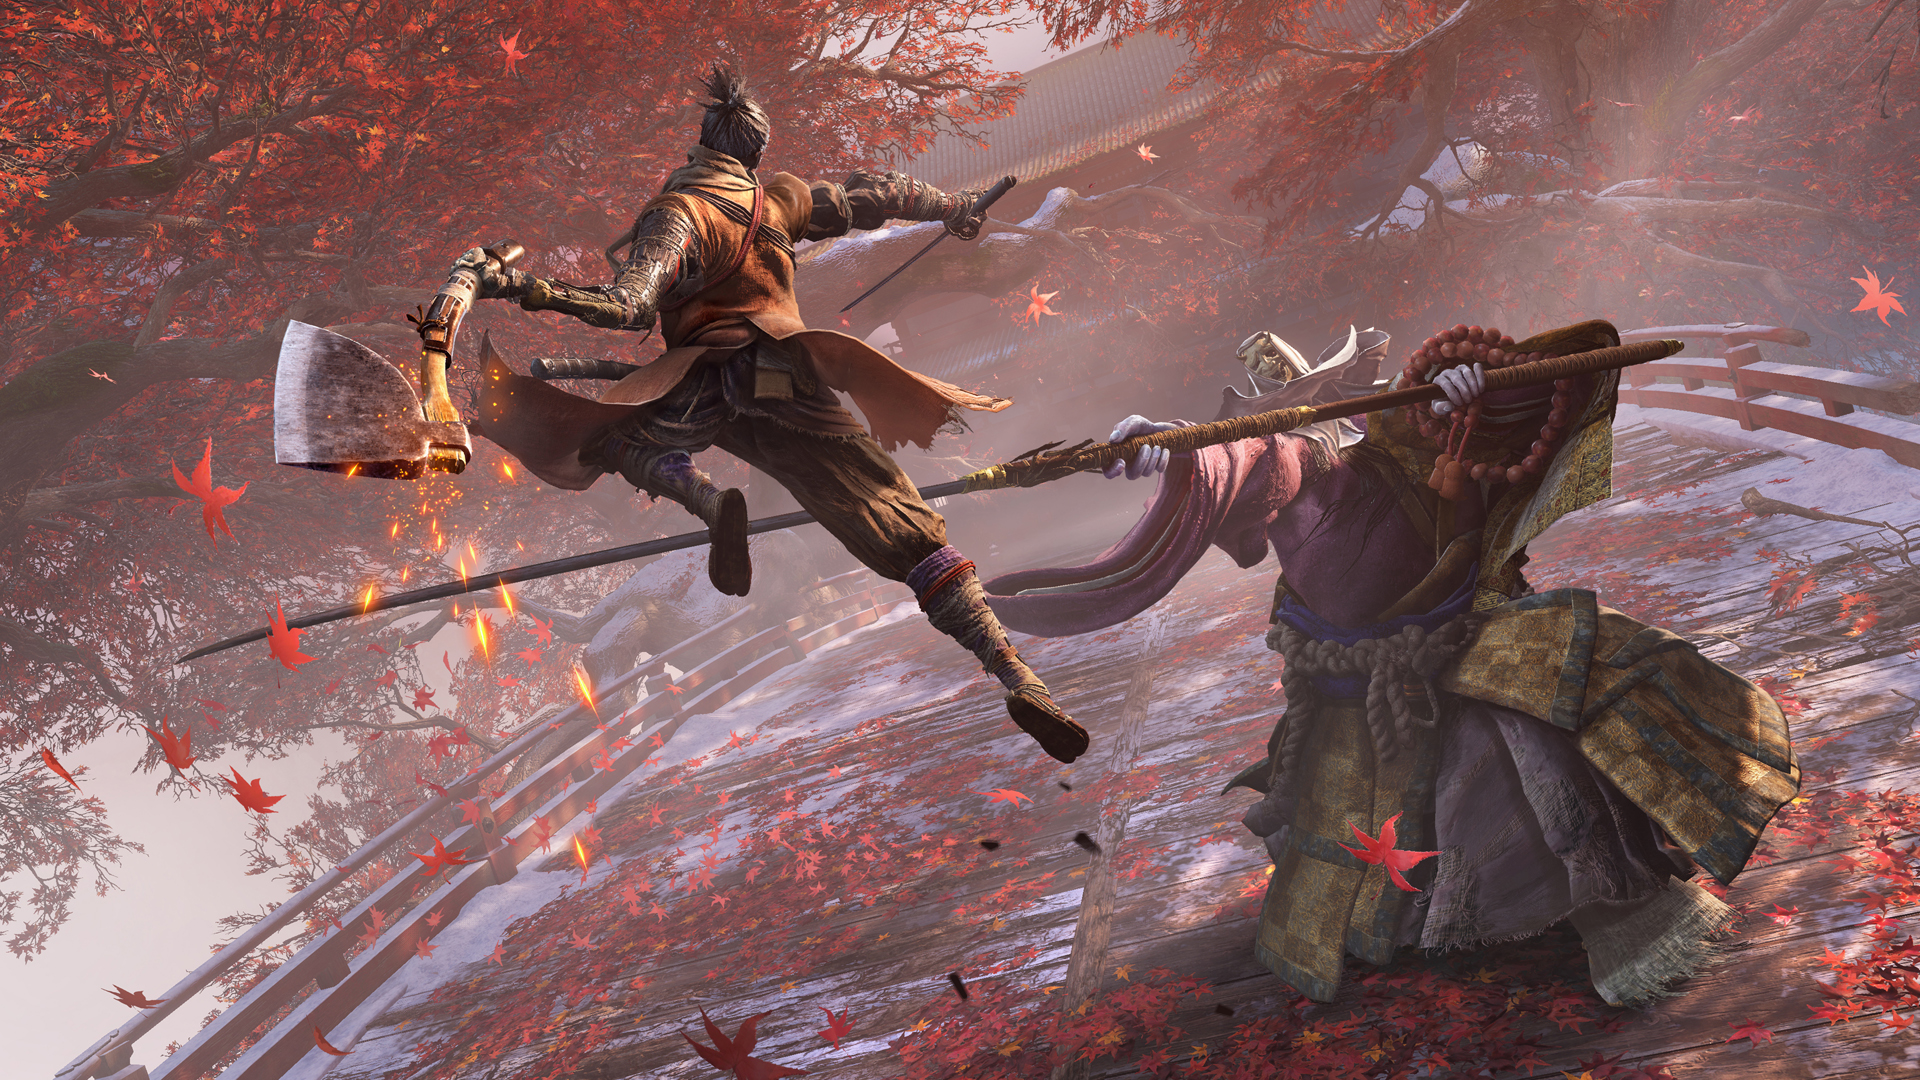 Sekiro endings explained – how to get the Shura Immortal Severance Purification and Return conclusions